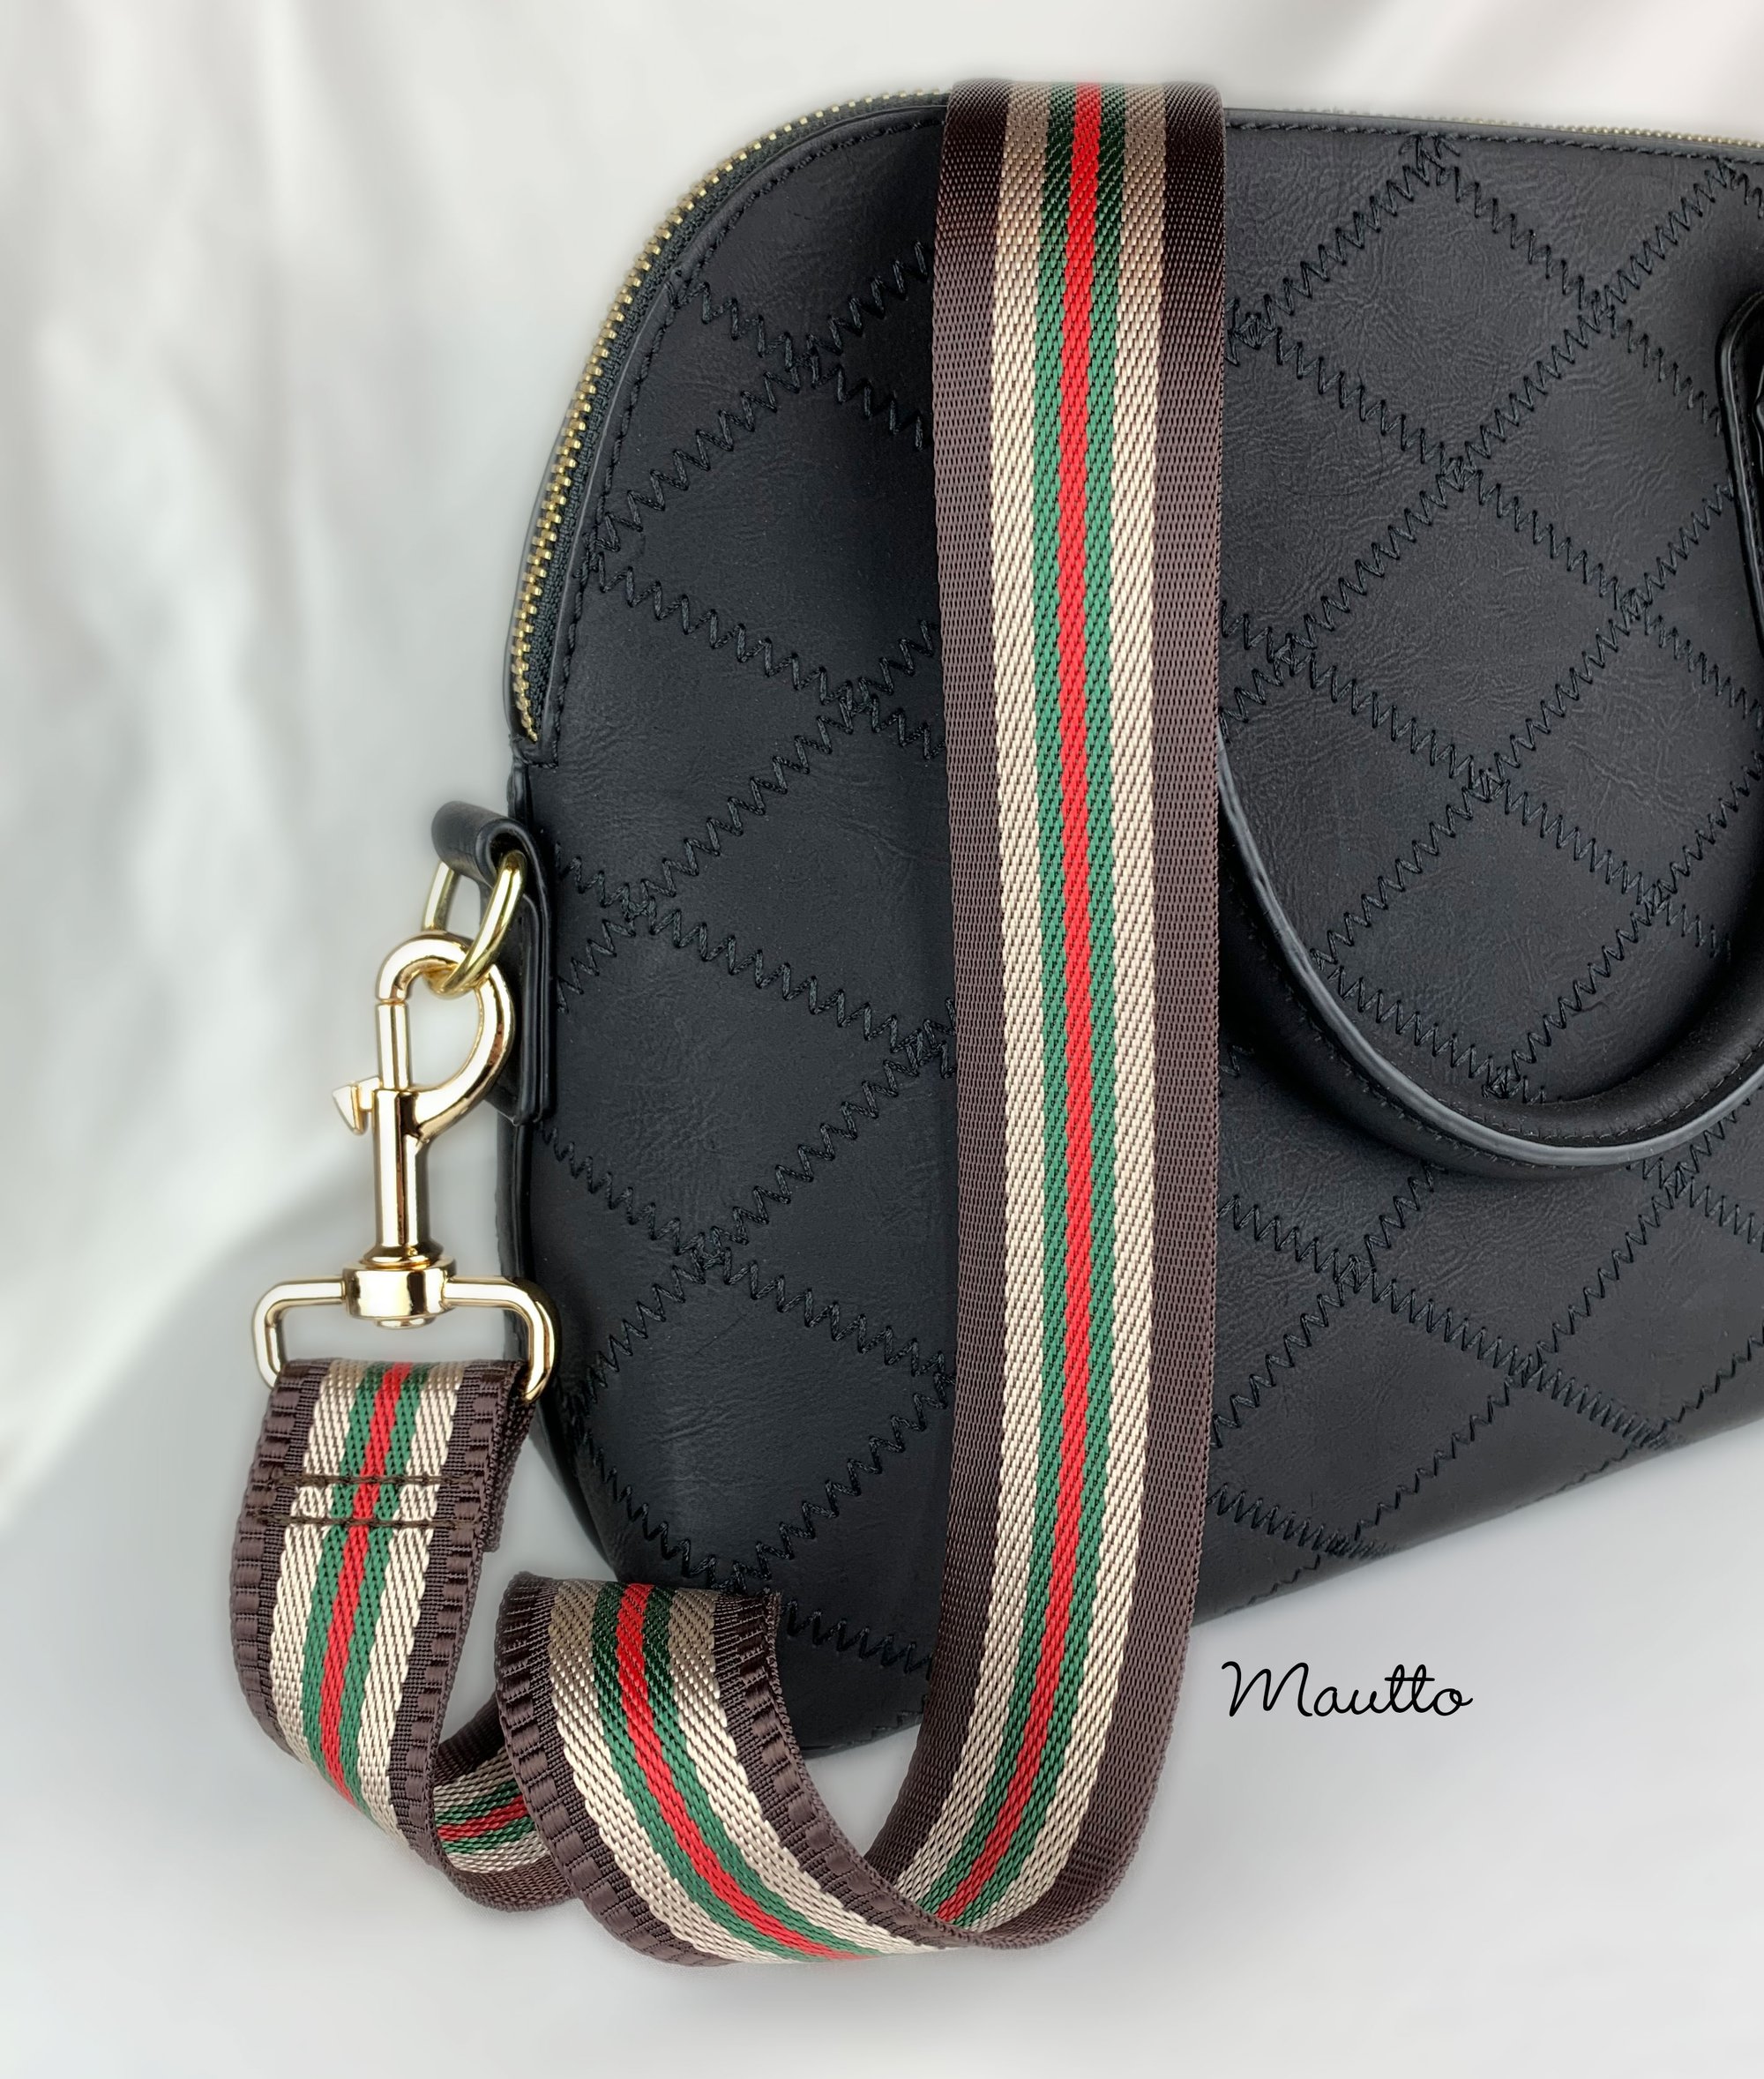 Brown-Tan-Green-Red Strap for Bags - 1.5 Wide Nylon - Adjustable Length -  Dog Leash Style #19 Hooks, Replacement Purse Straps & Handbag Accessories  - Leather, Chain & more